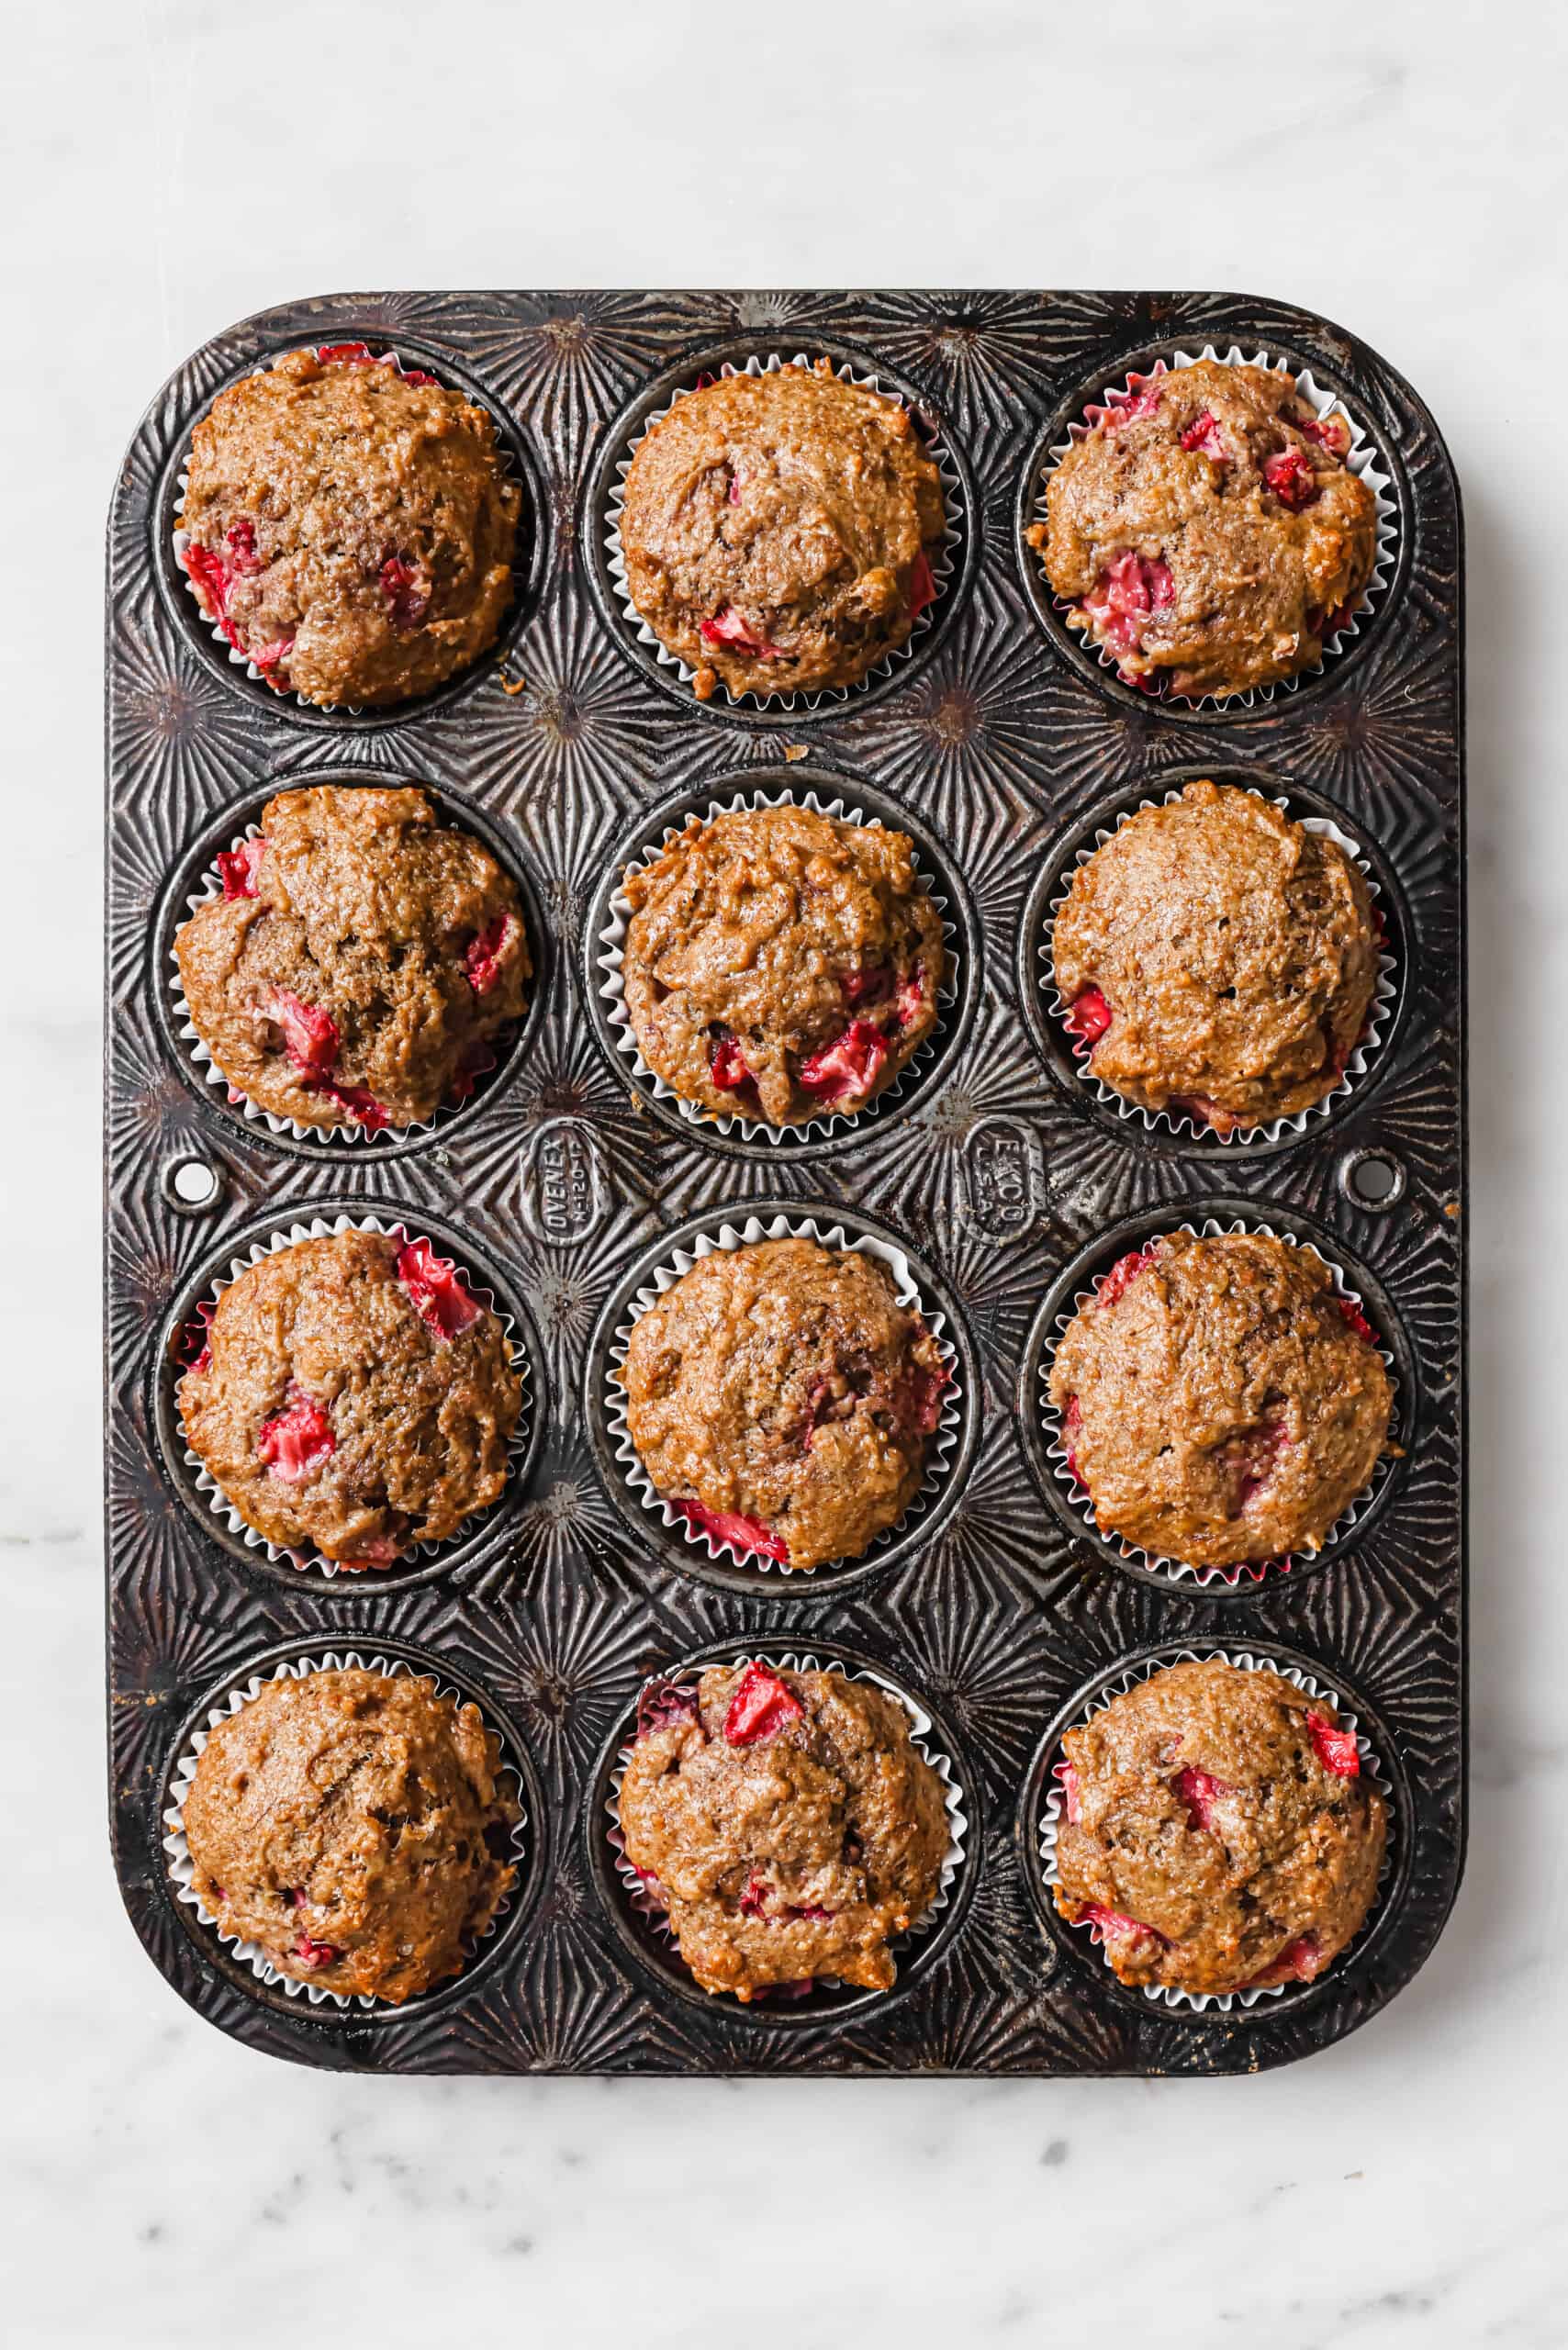 Baked muffins in the tray.